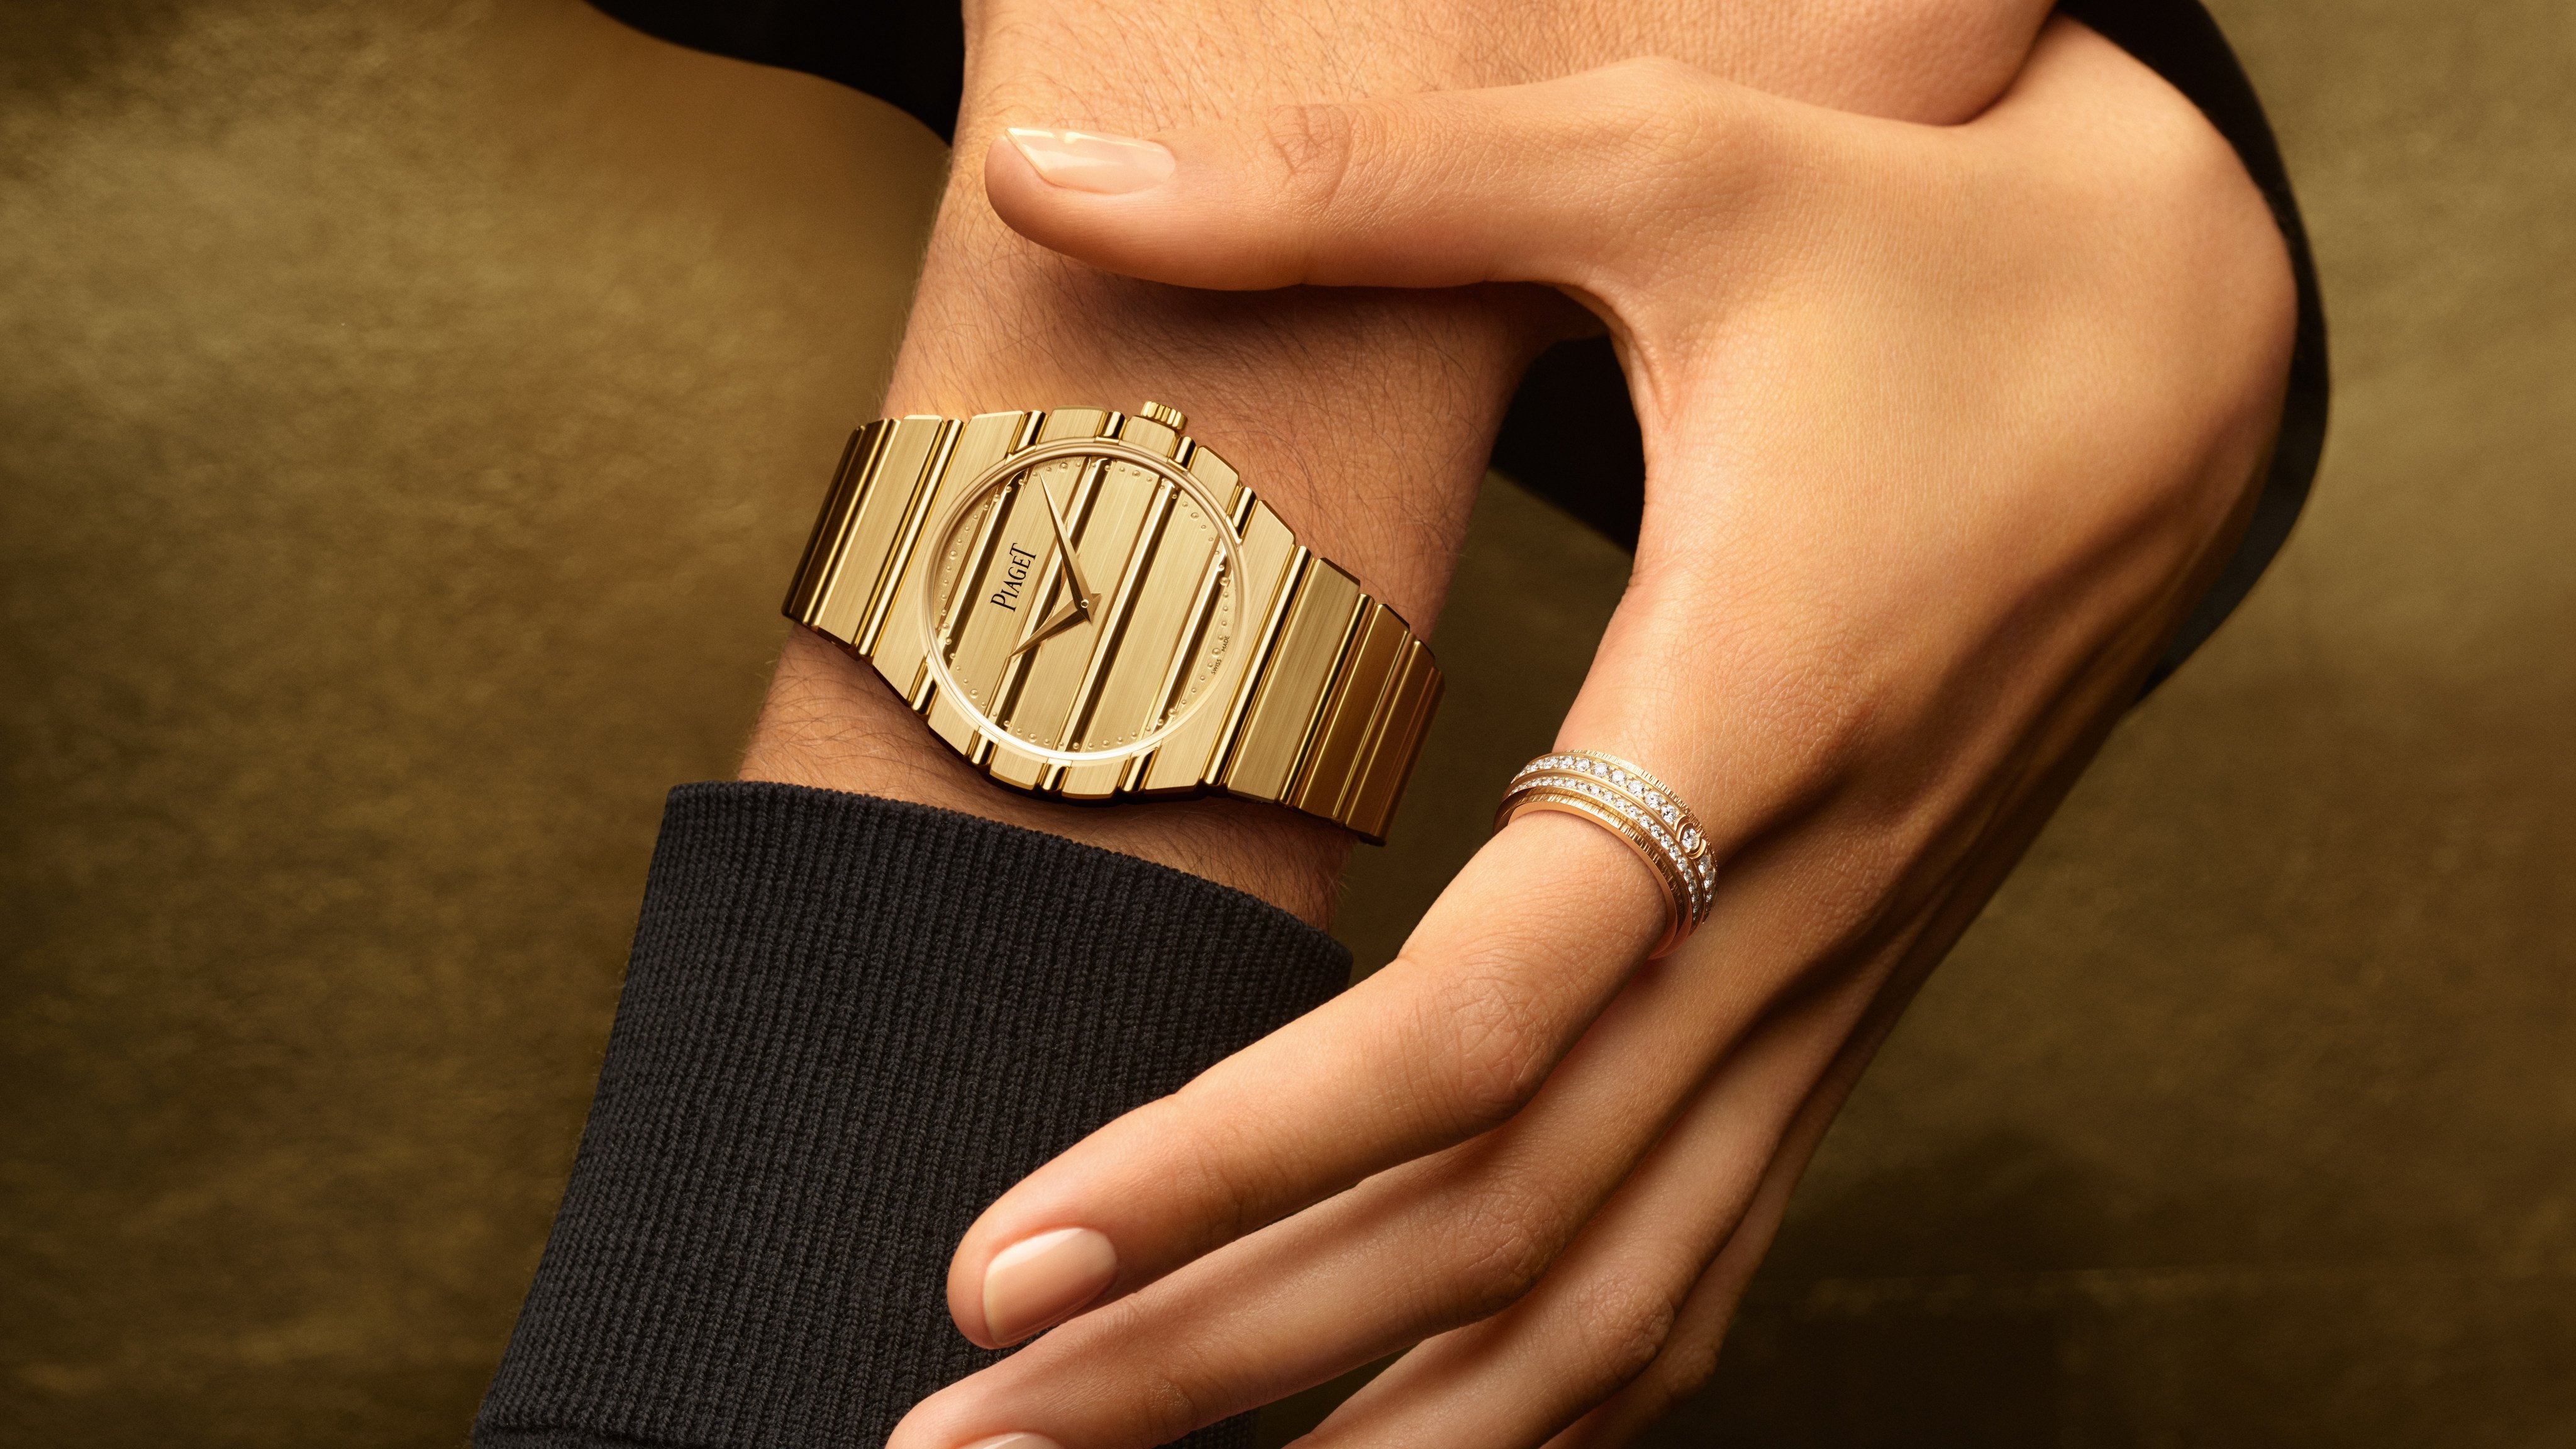 Loved by Bond girl Ursula Andress and Michael B. Jordan, the Piaget Polo 79 is one of the classic watch models being newly revived for a new generation of timepiece enthusiasts. Photos: Handout